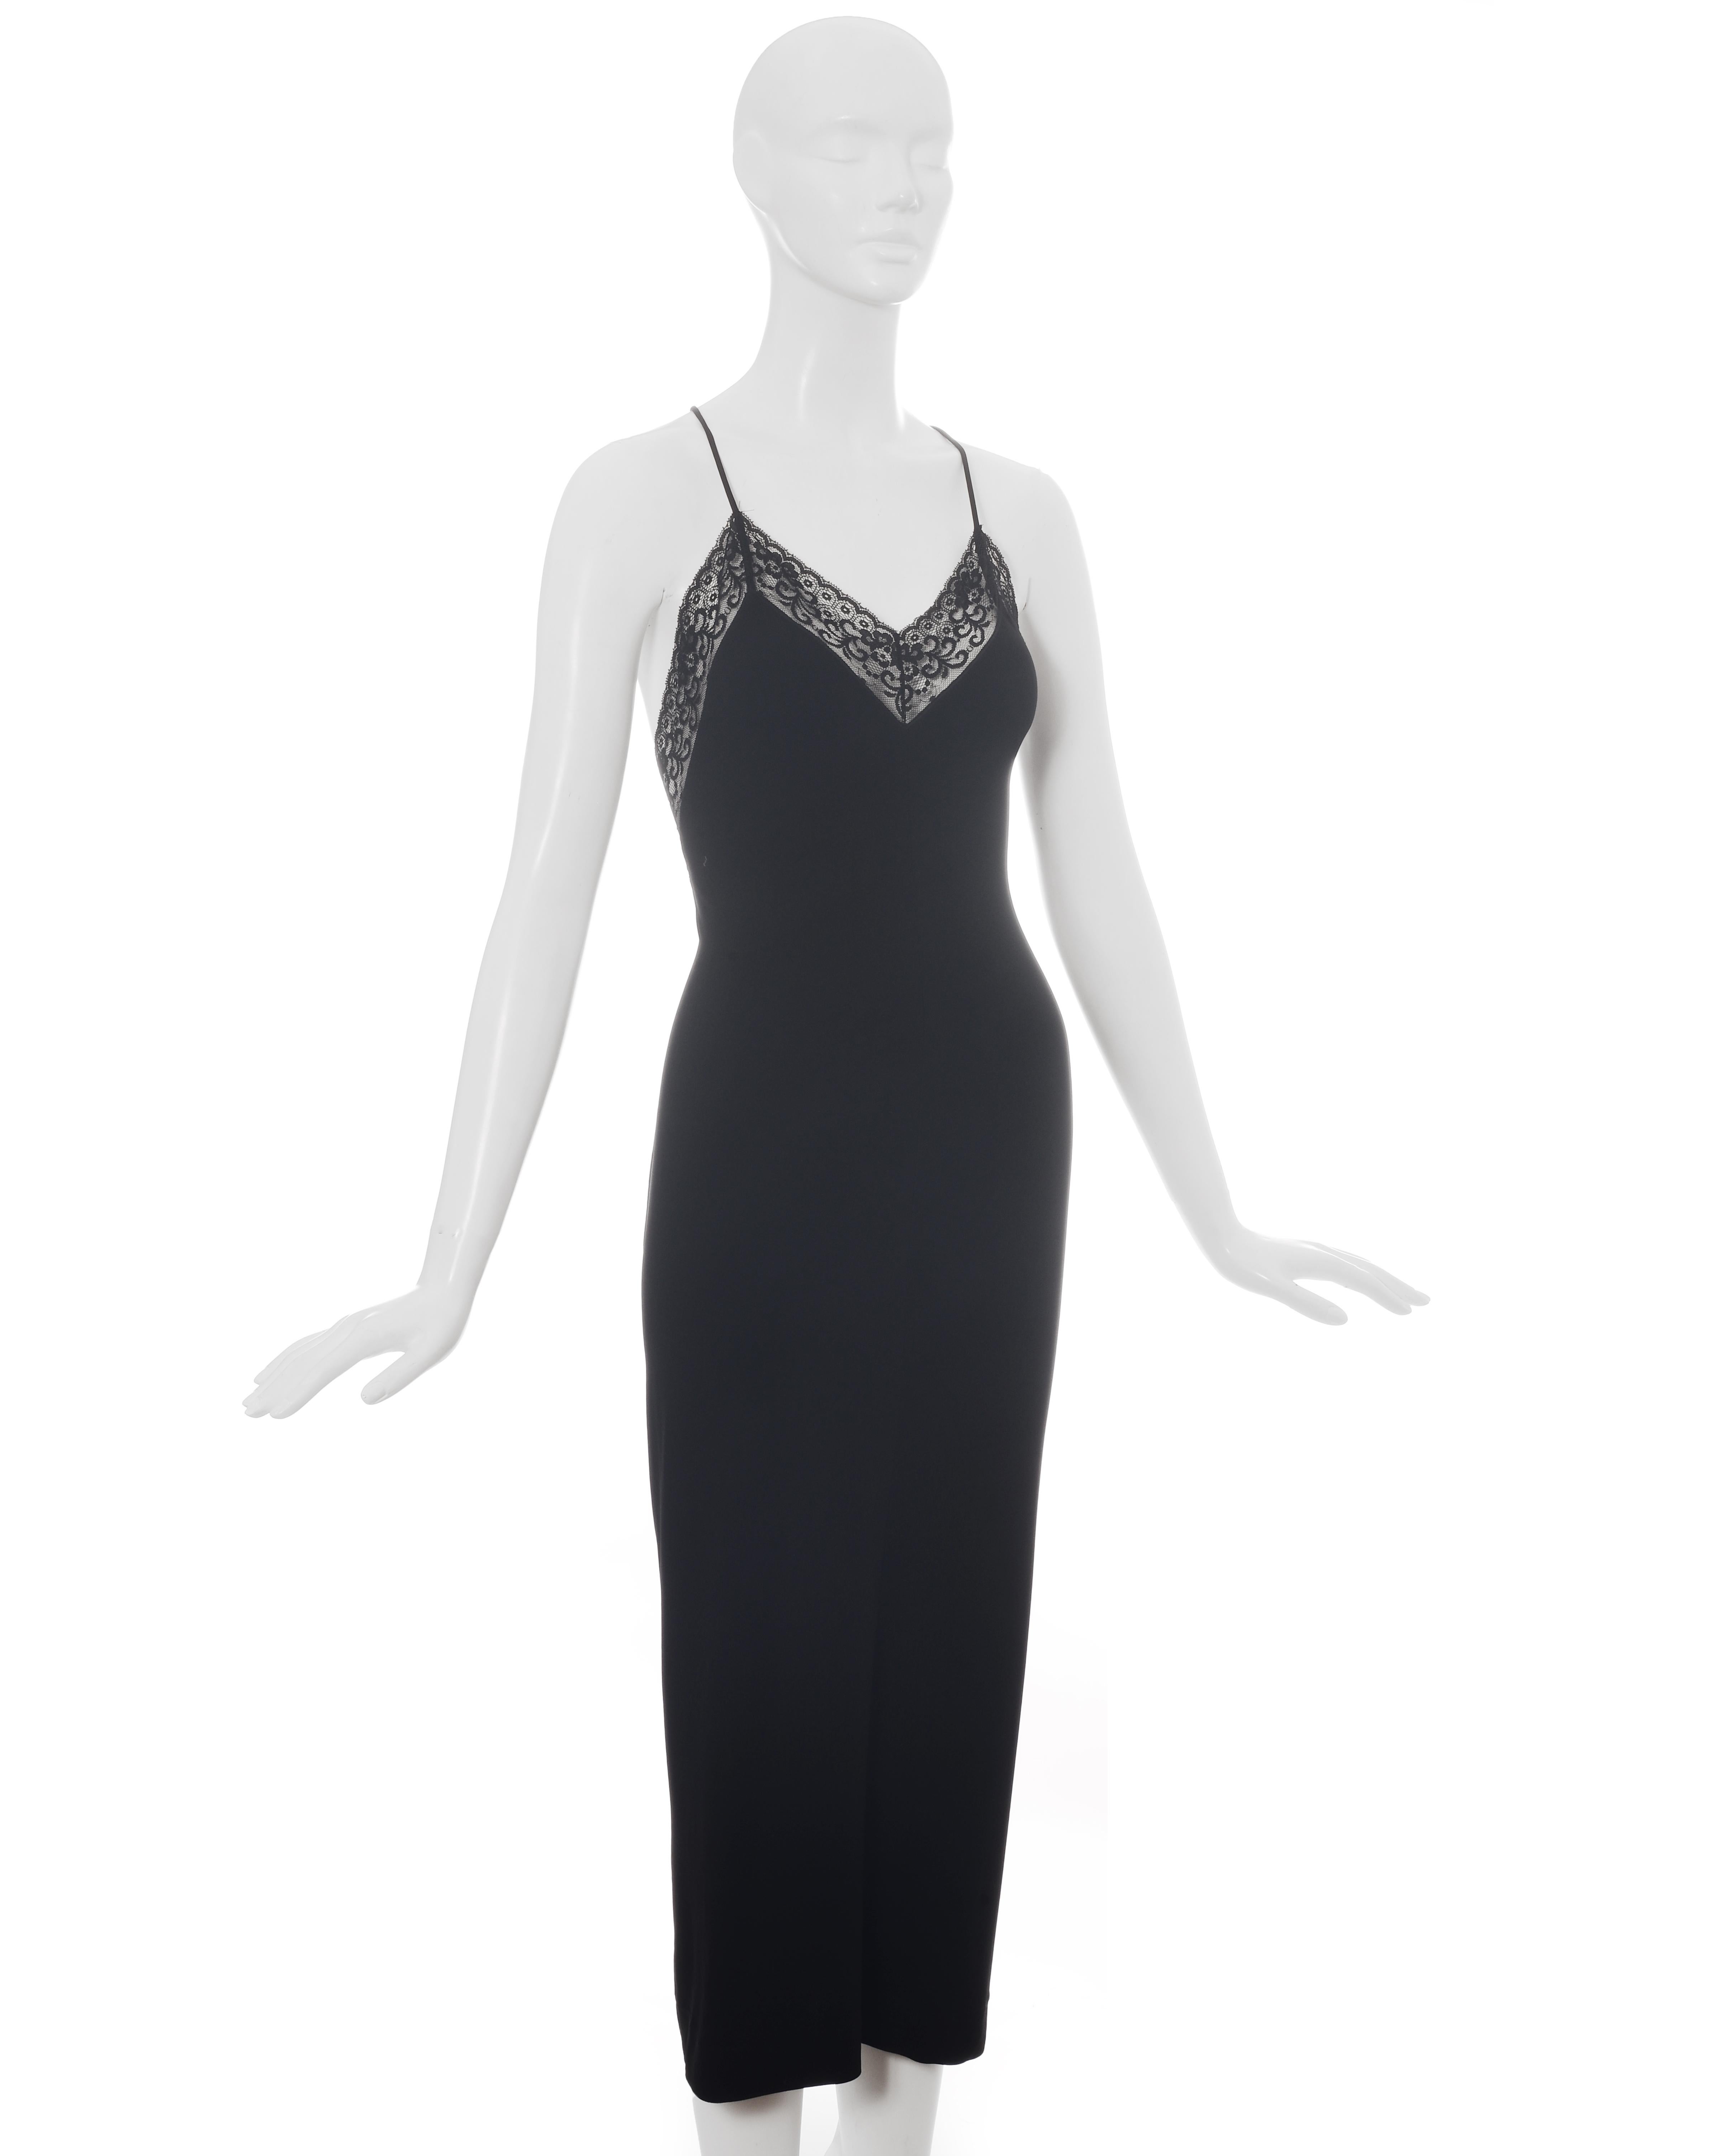 Women's Dolce & Gabbana black rayon figure hugging evening dress with lace, c. 1990s For Sale